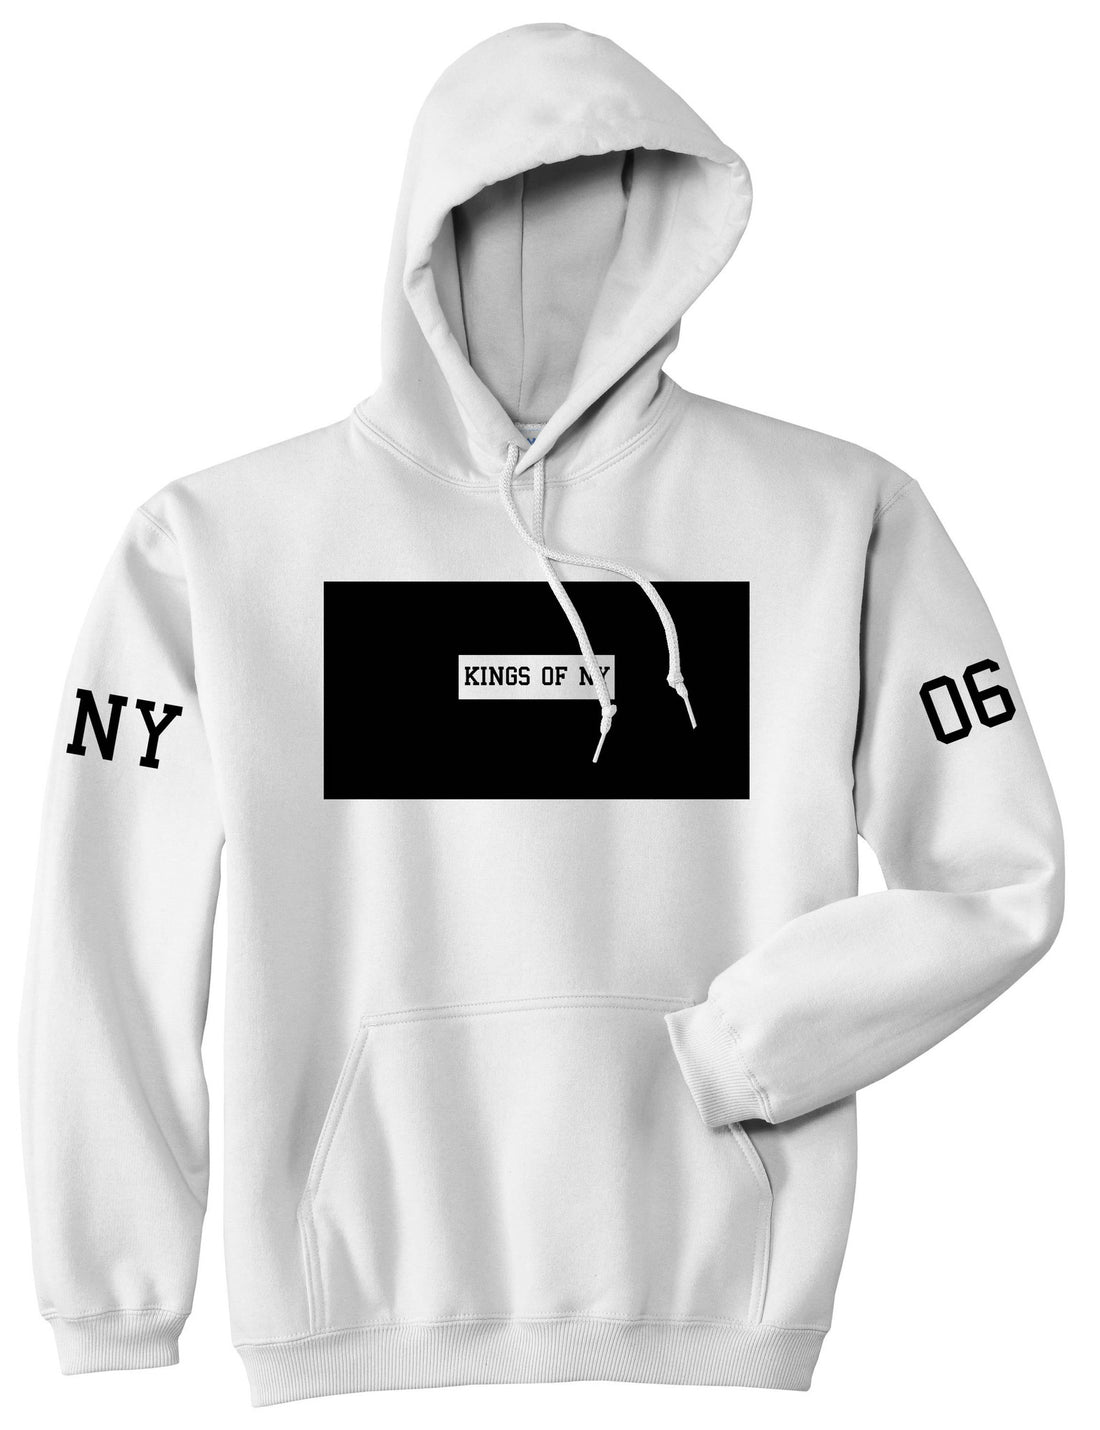 New York Logo 2006 Style Trill Boys Kids Pullover Hoodie Hoody in White by Kings Of NY